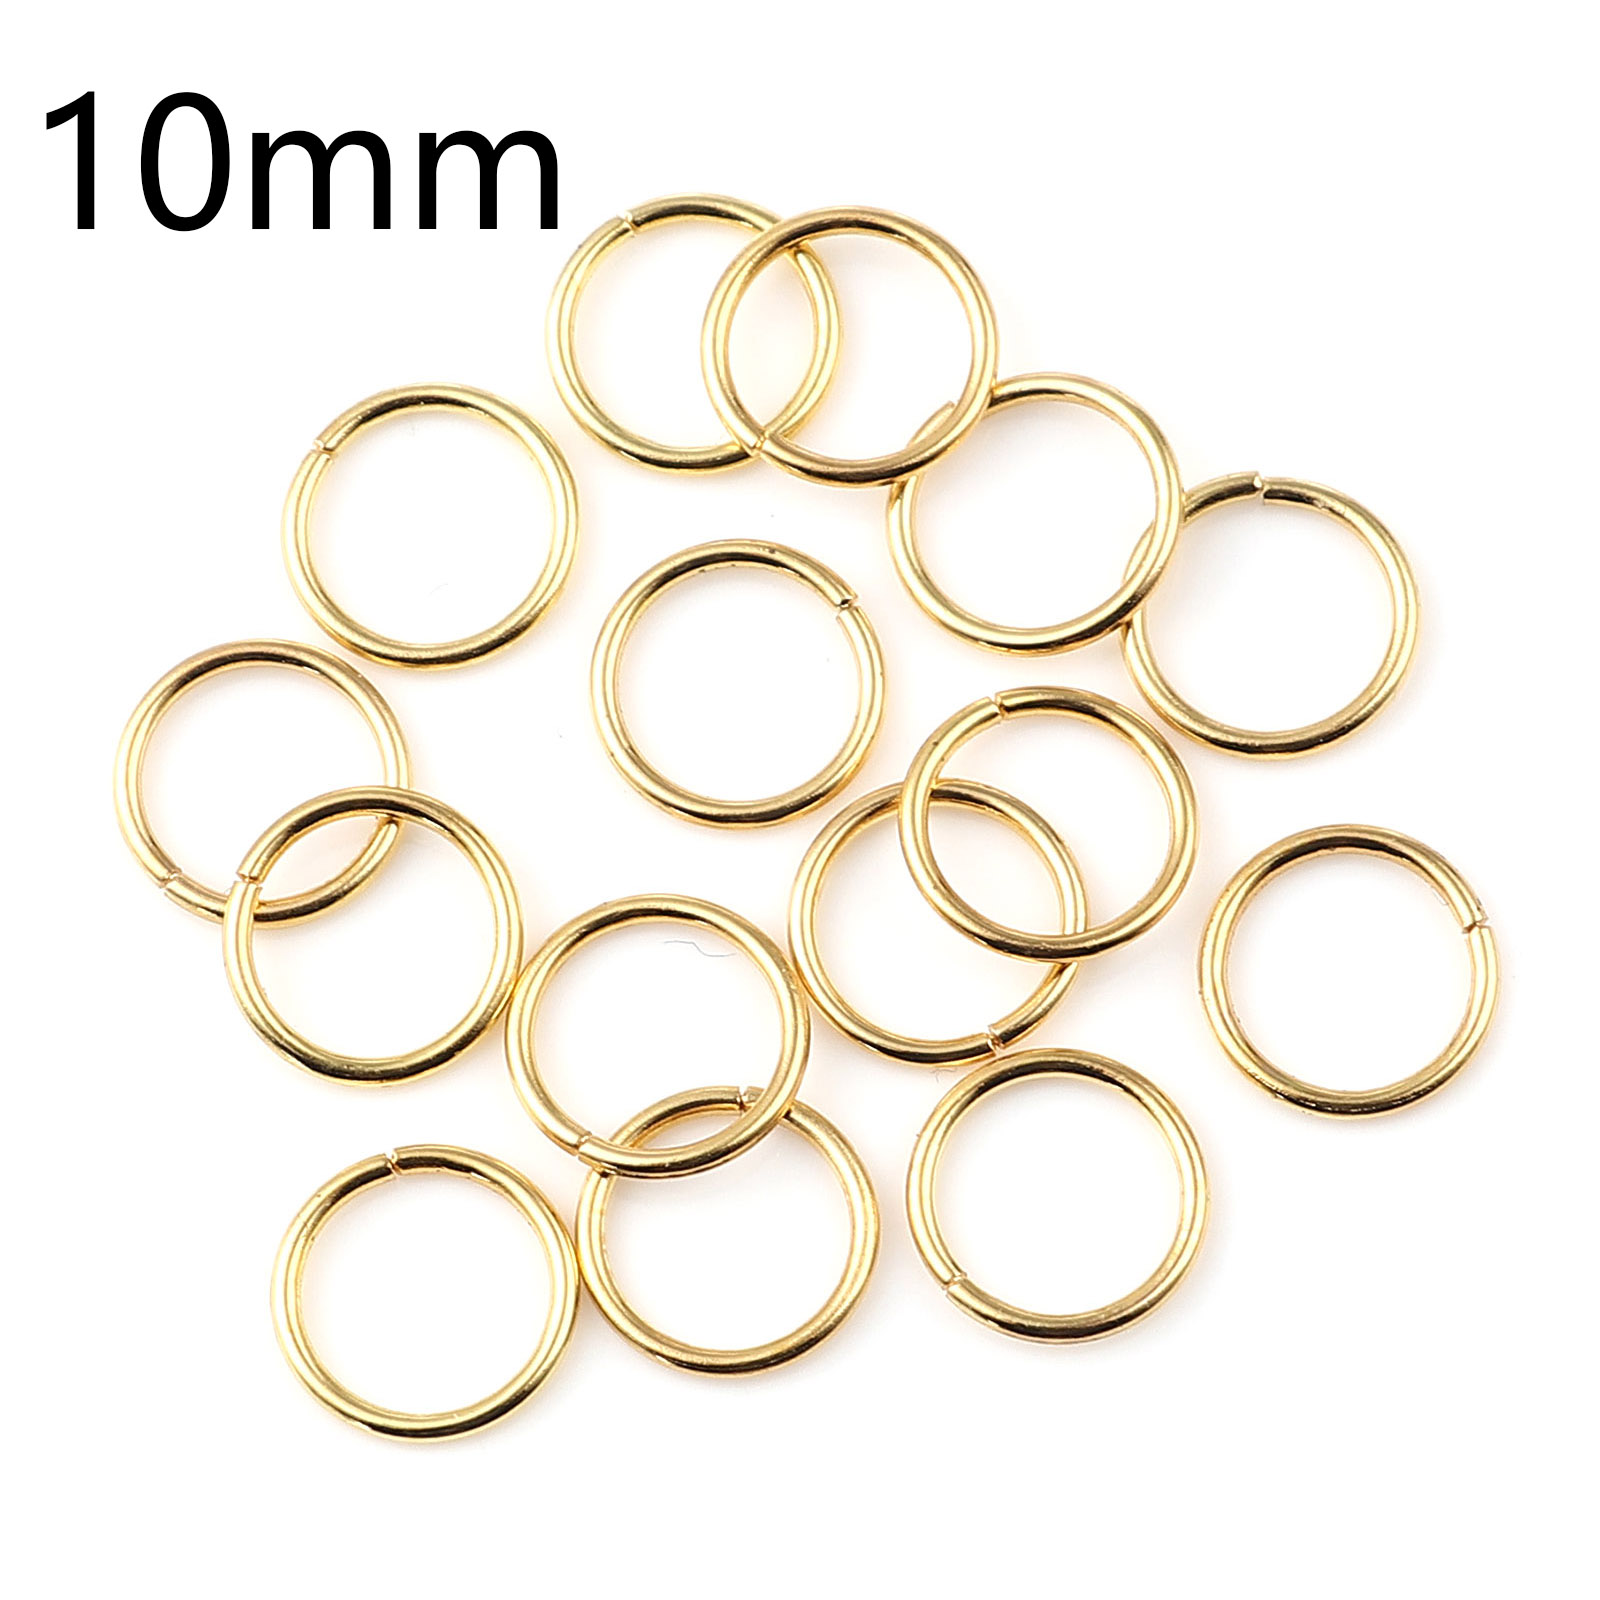 Picture of 1mm Iron Based Alloy Open Jump Rings Findings Circle Ring Gold Plated 10mm Dia, 200 PCs